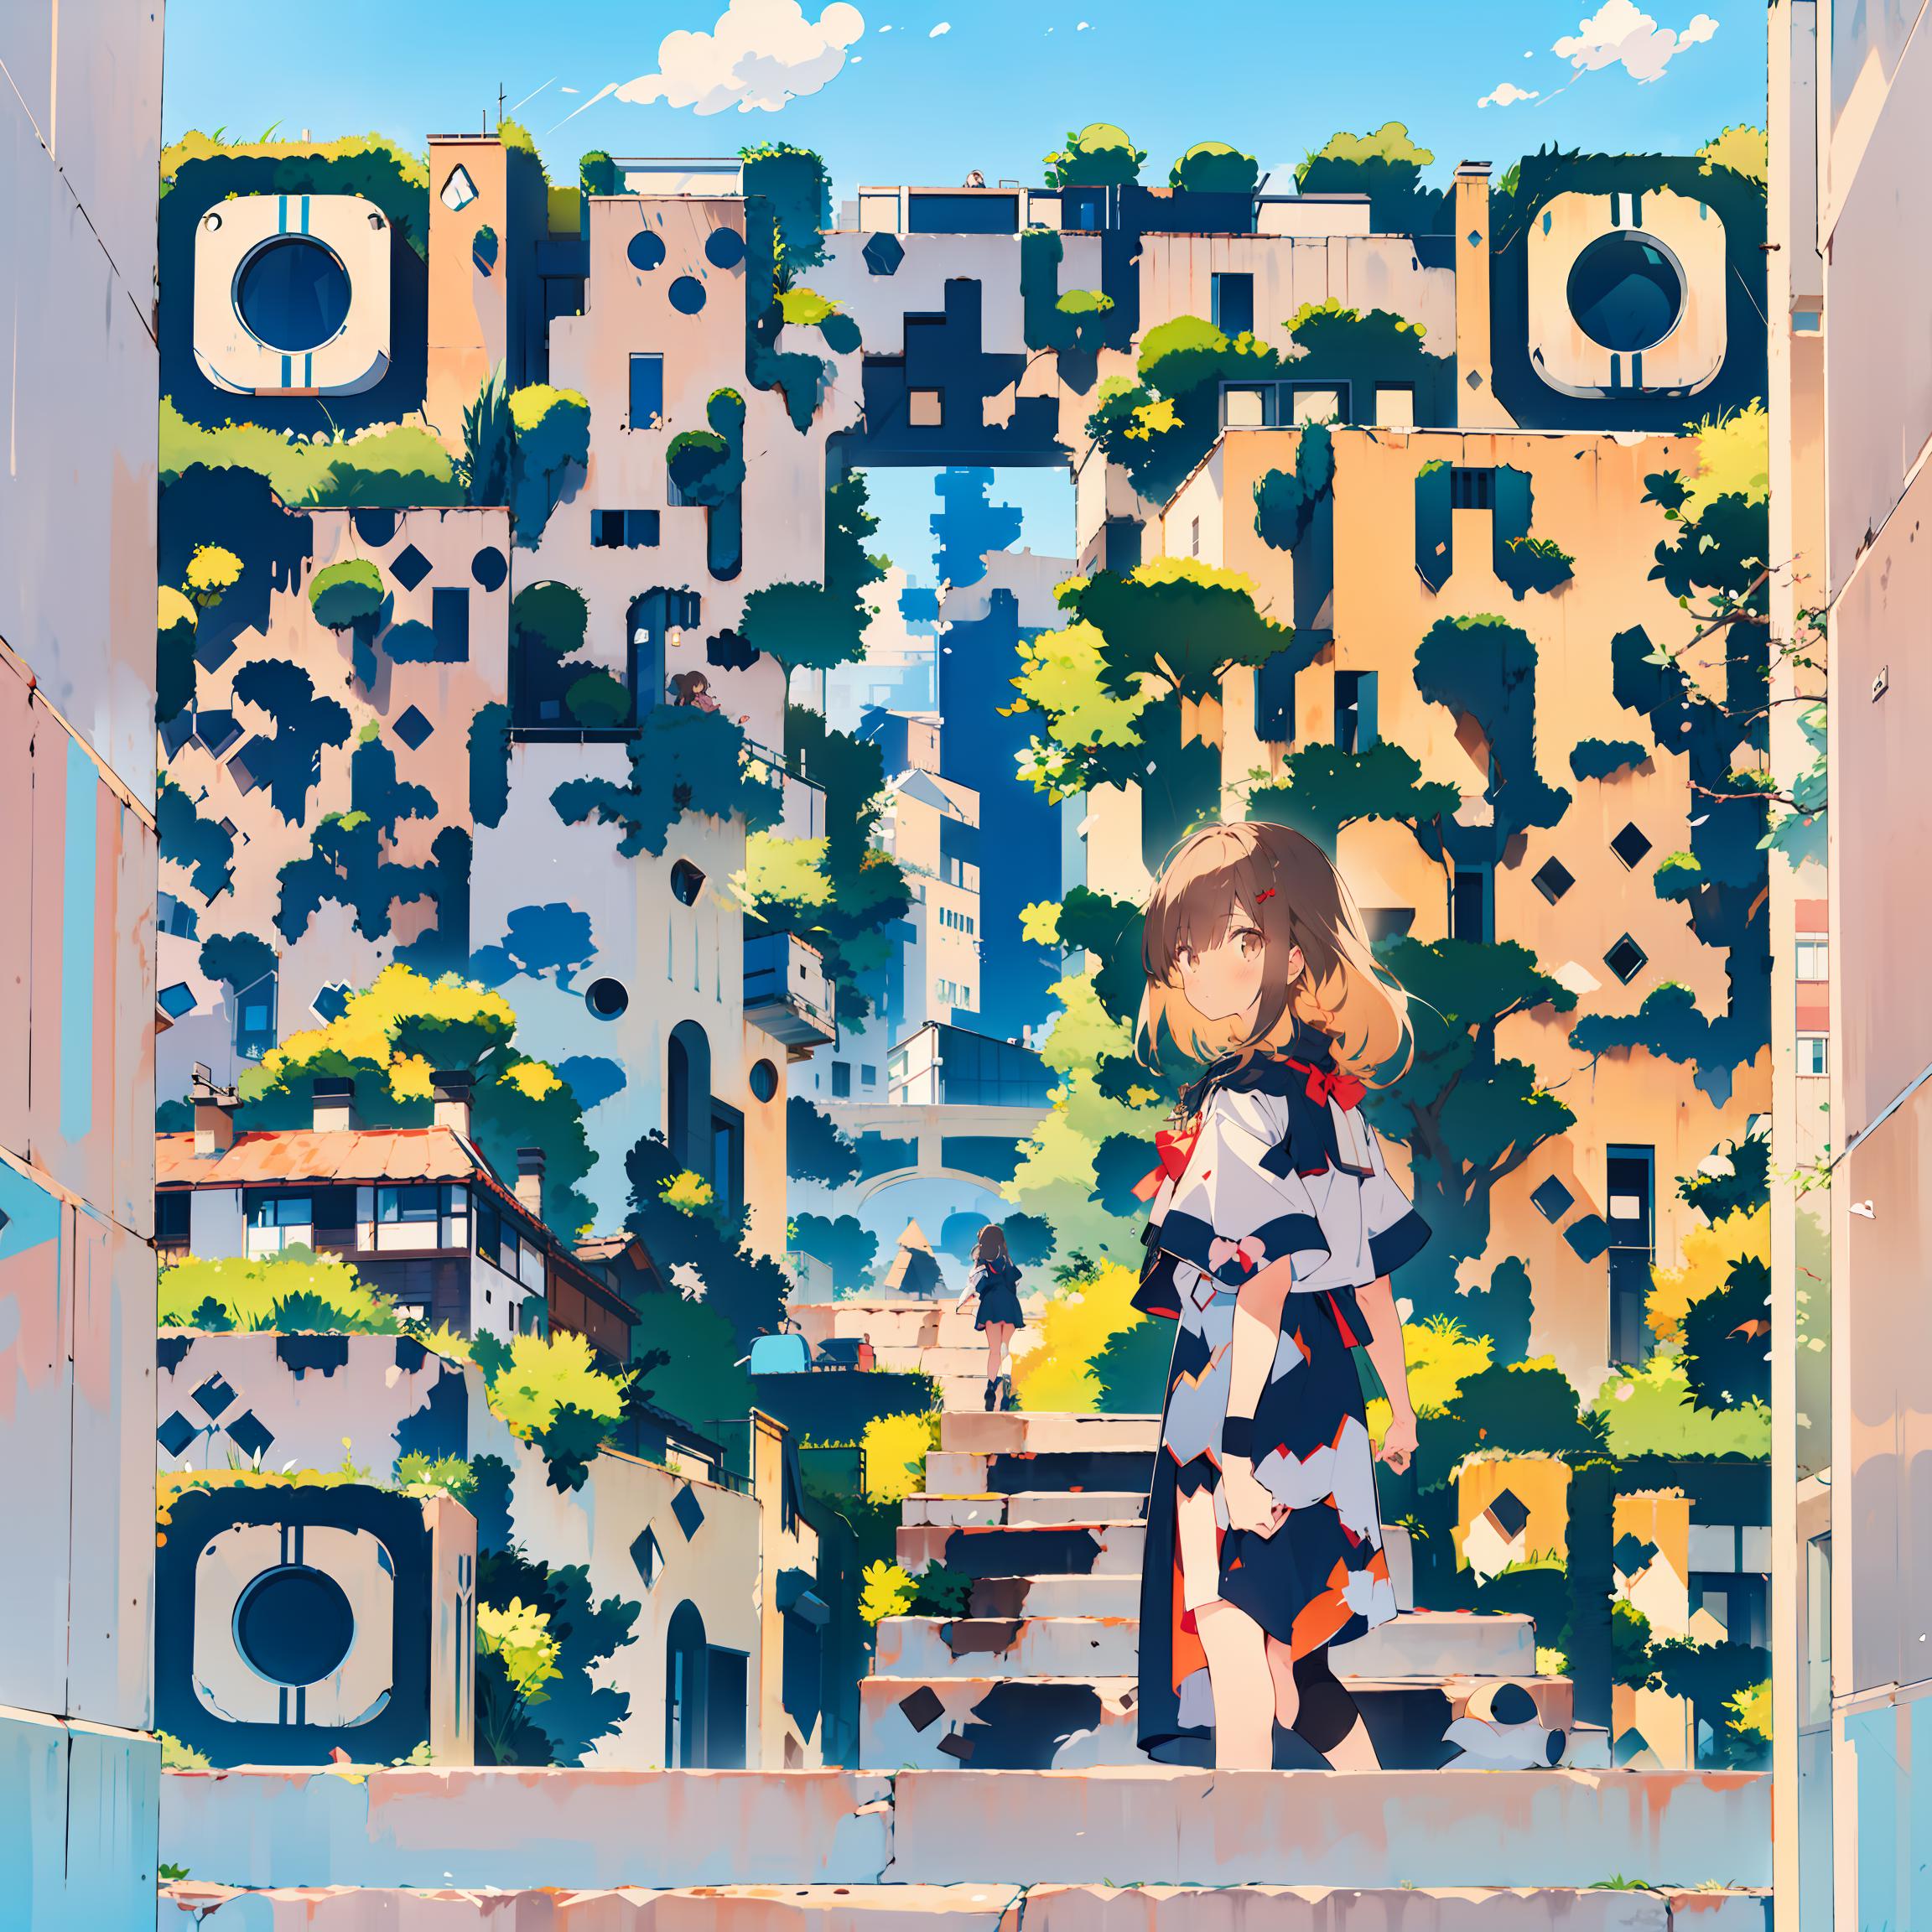 QR Code Monster image by Mitreaum